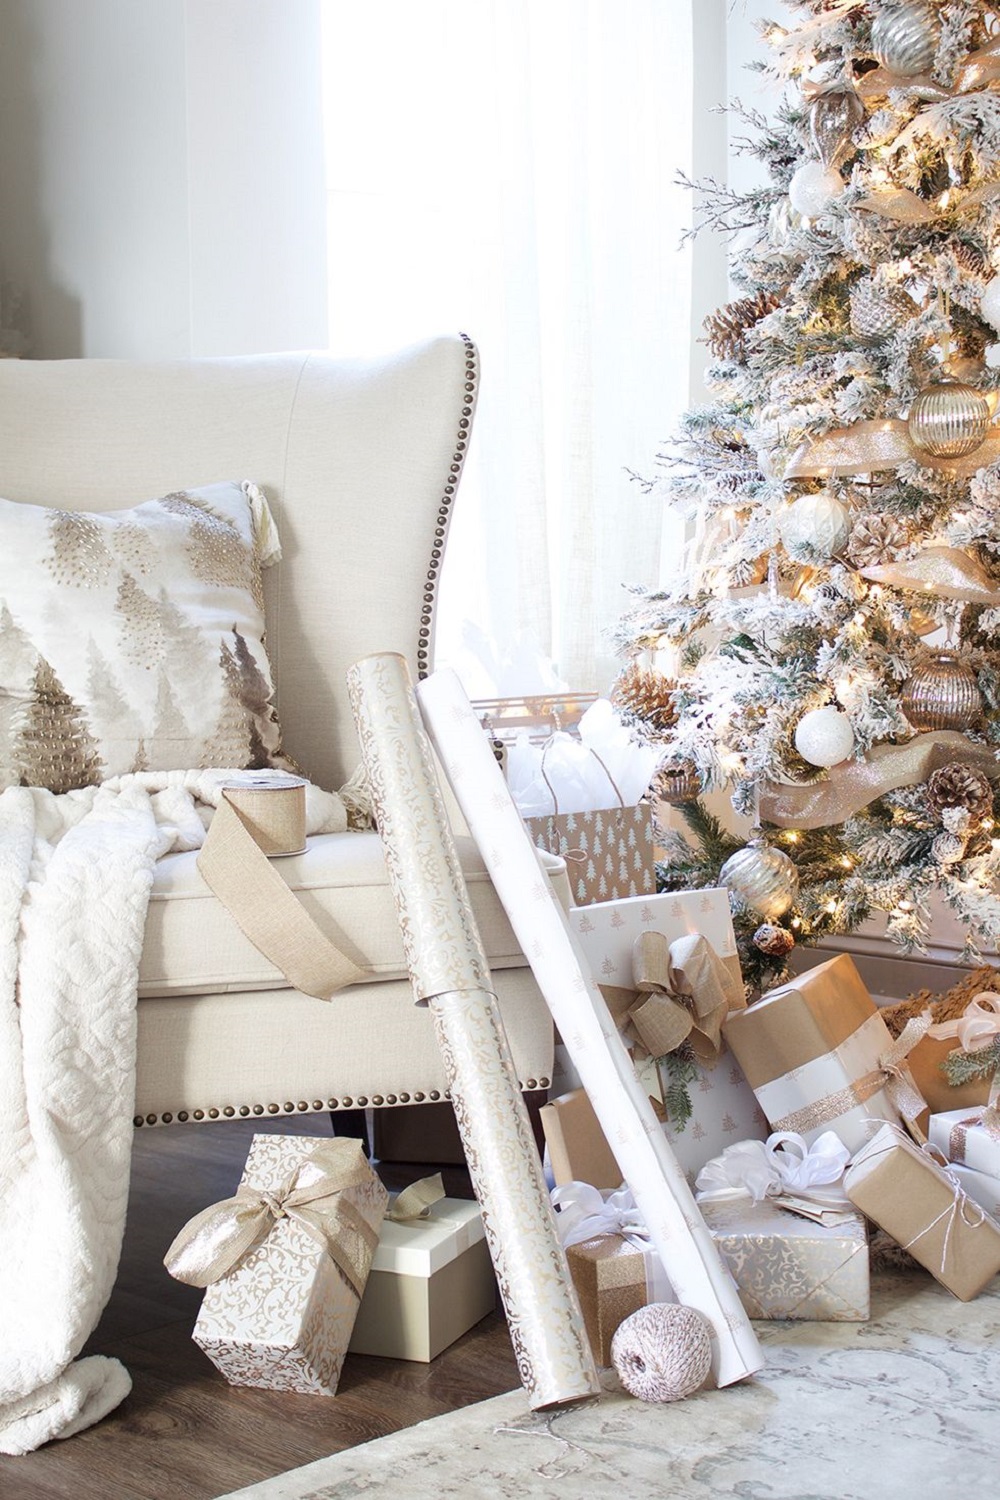 t4-2 Modern Christmas decorations ideas that are heartwarming